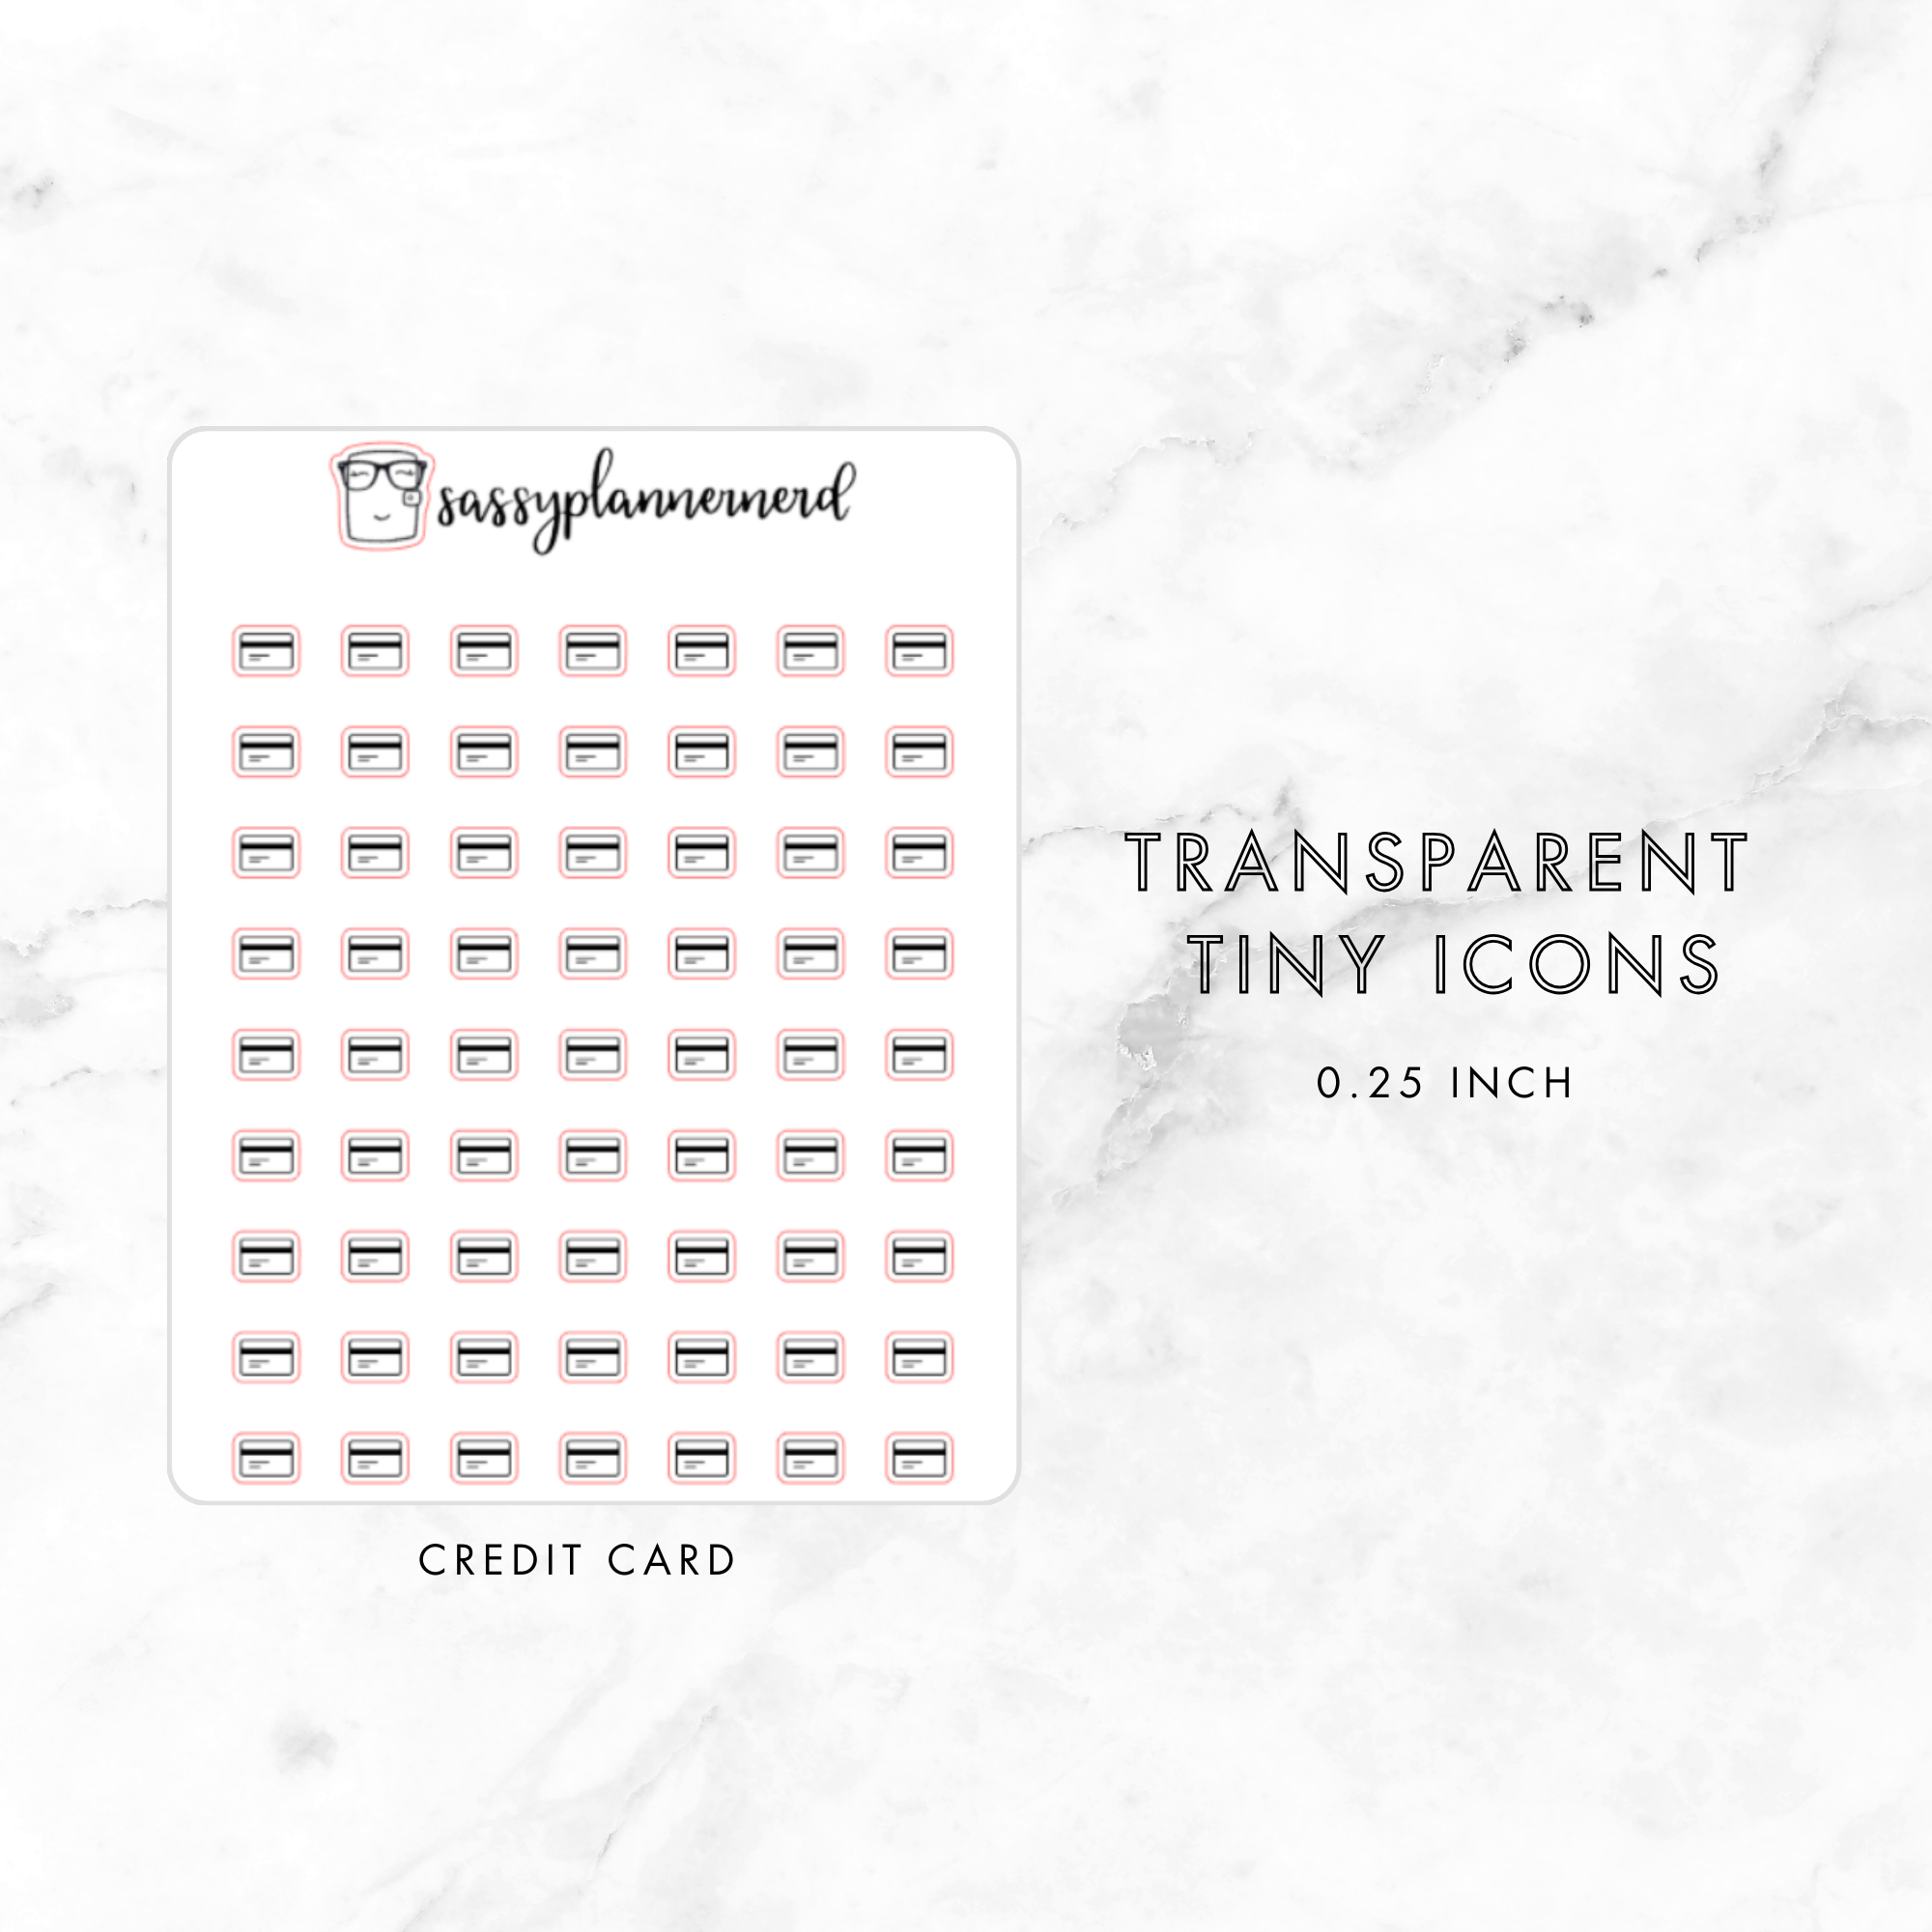 credit card - tiny icons